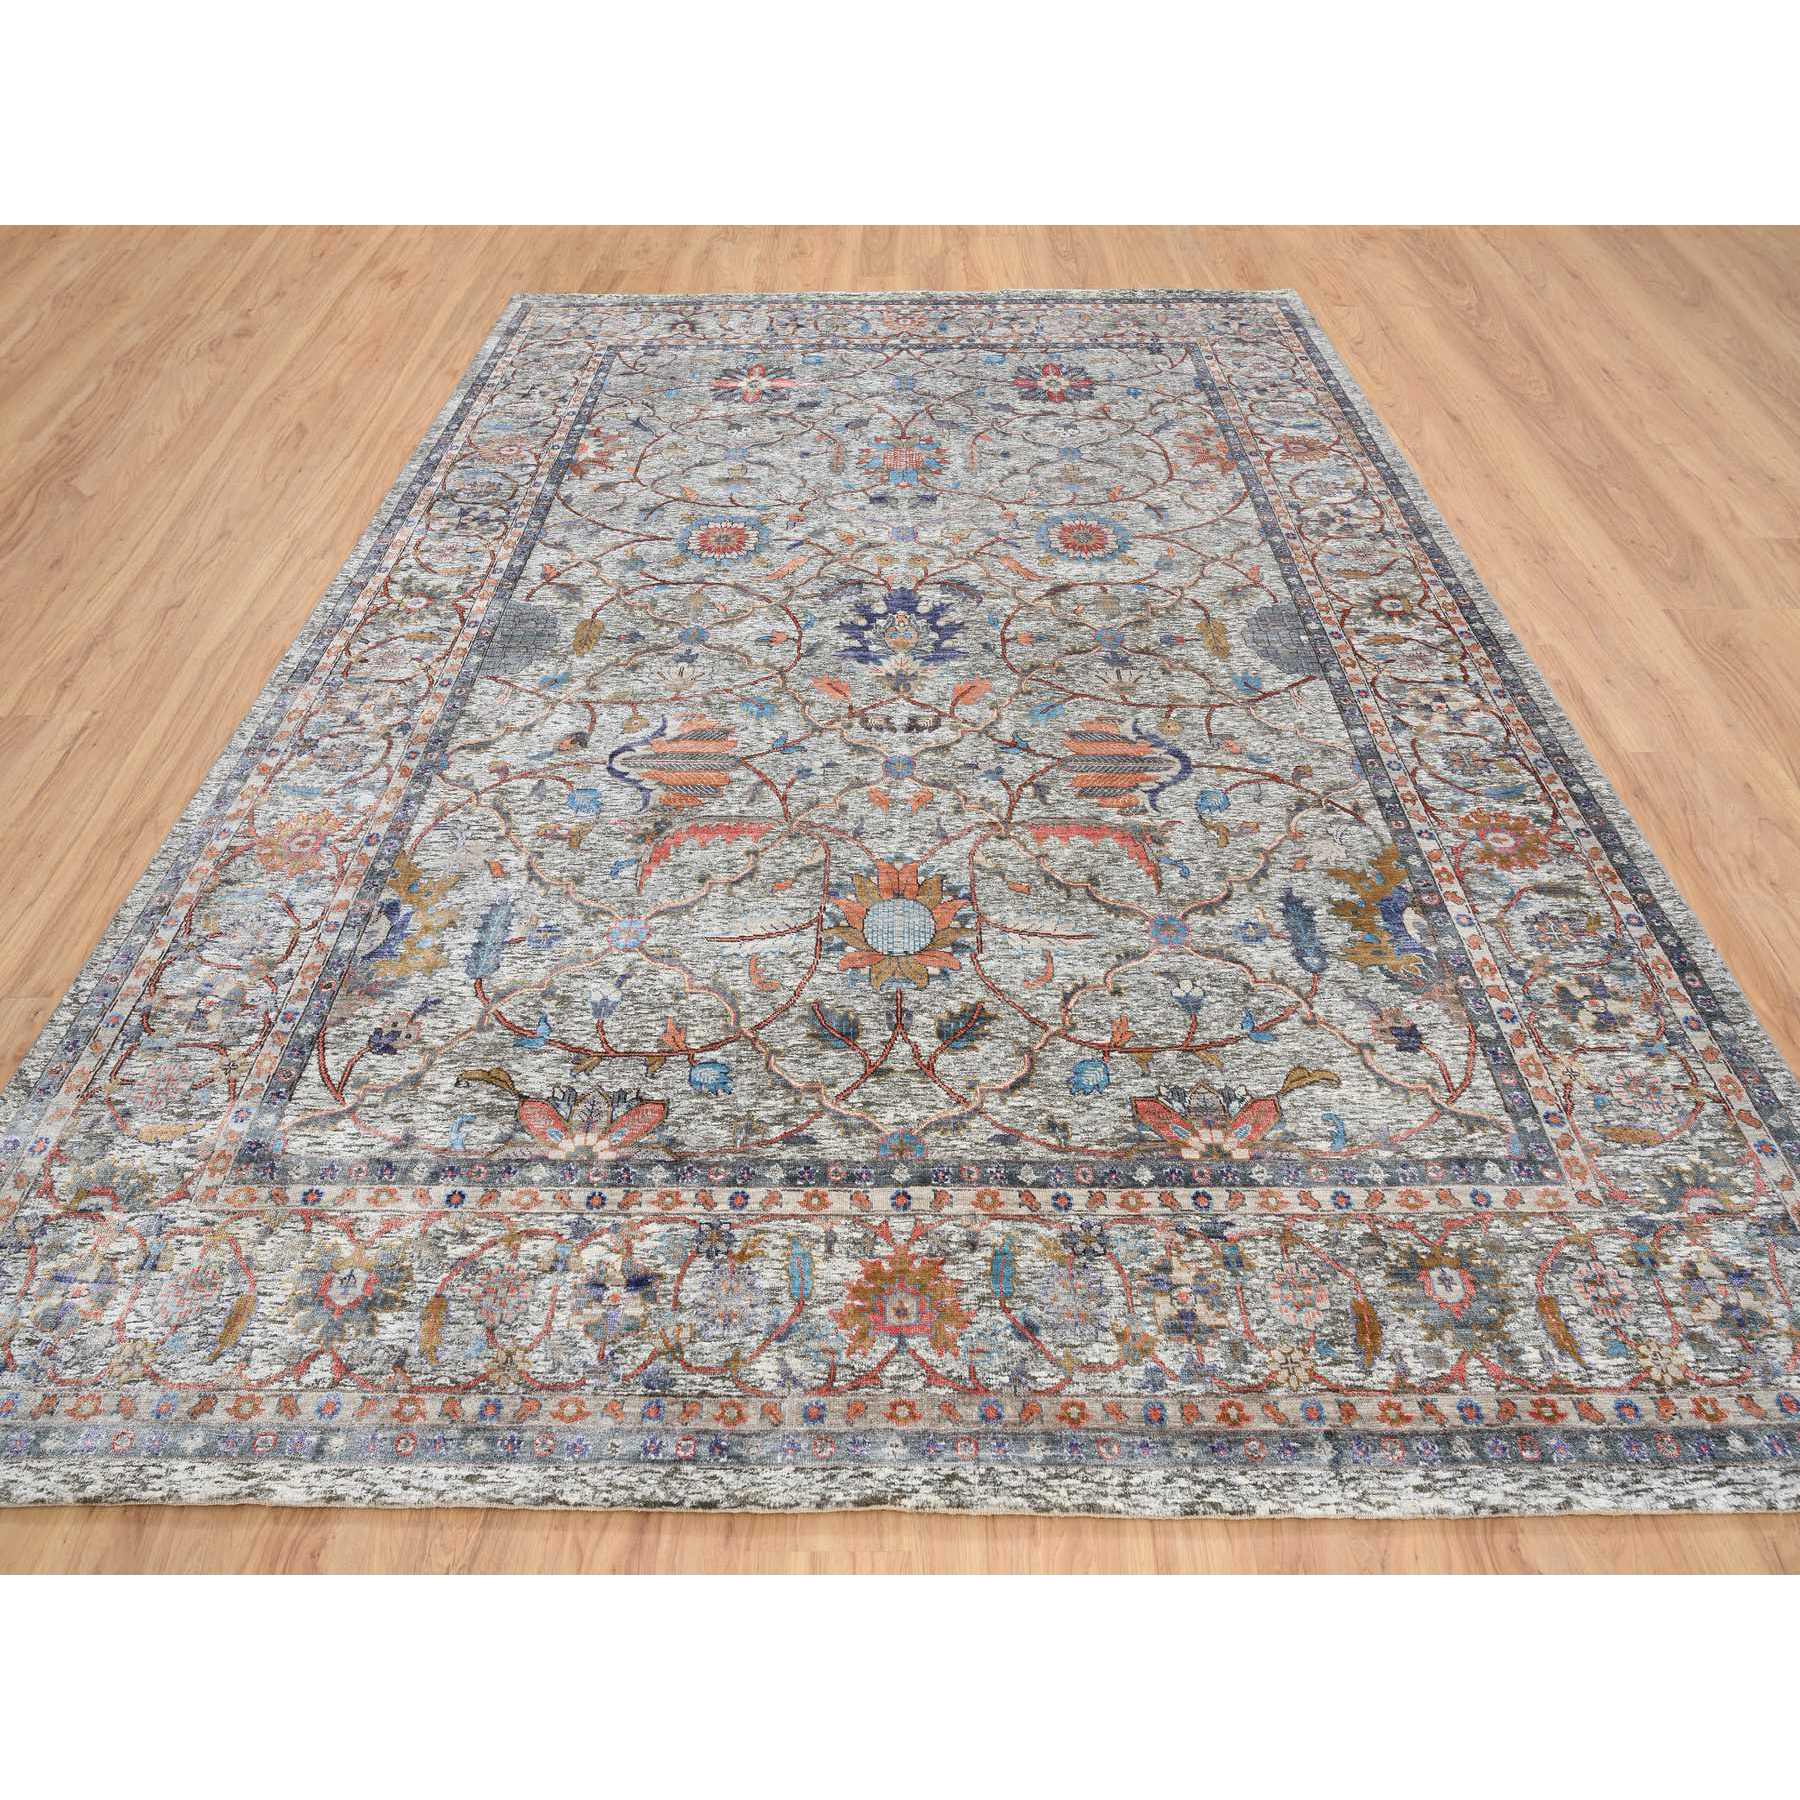 9'x12' Taupe, Salt and Pepper Effect, Silk with Textured Wool Persian Scrolls Leaf and Flower Design, Hand Woven Oriental Rug 